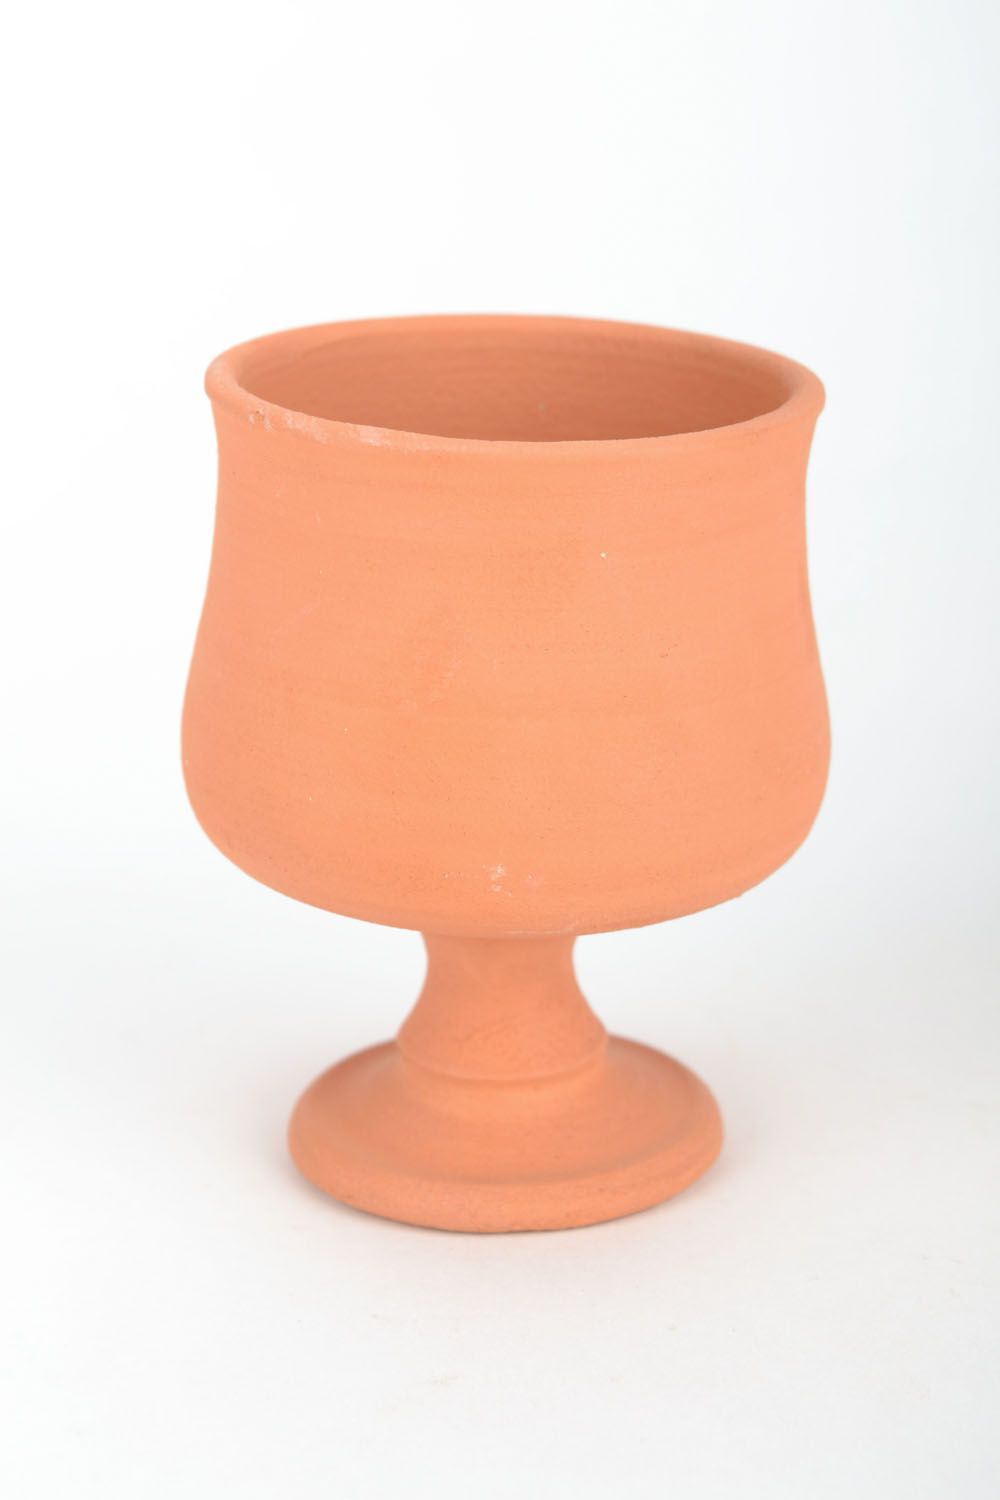 Clay goblet photo 3